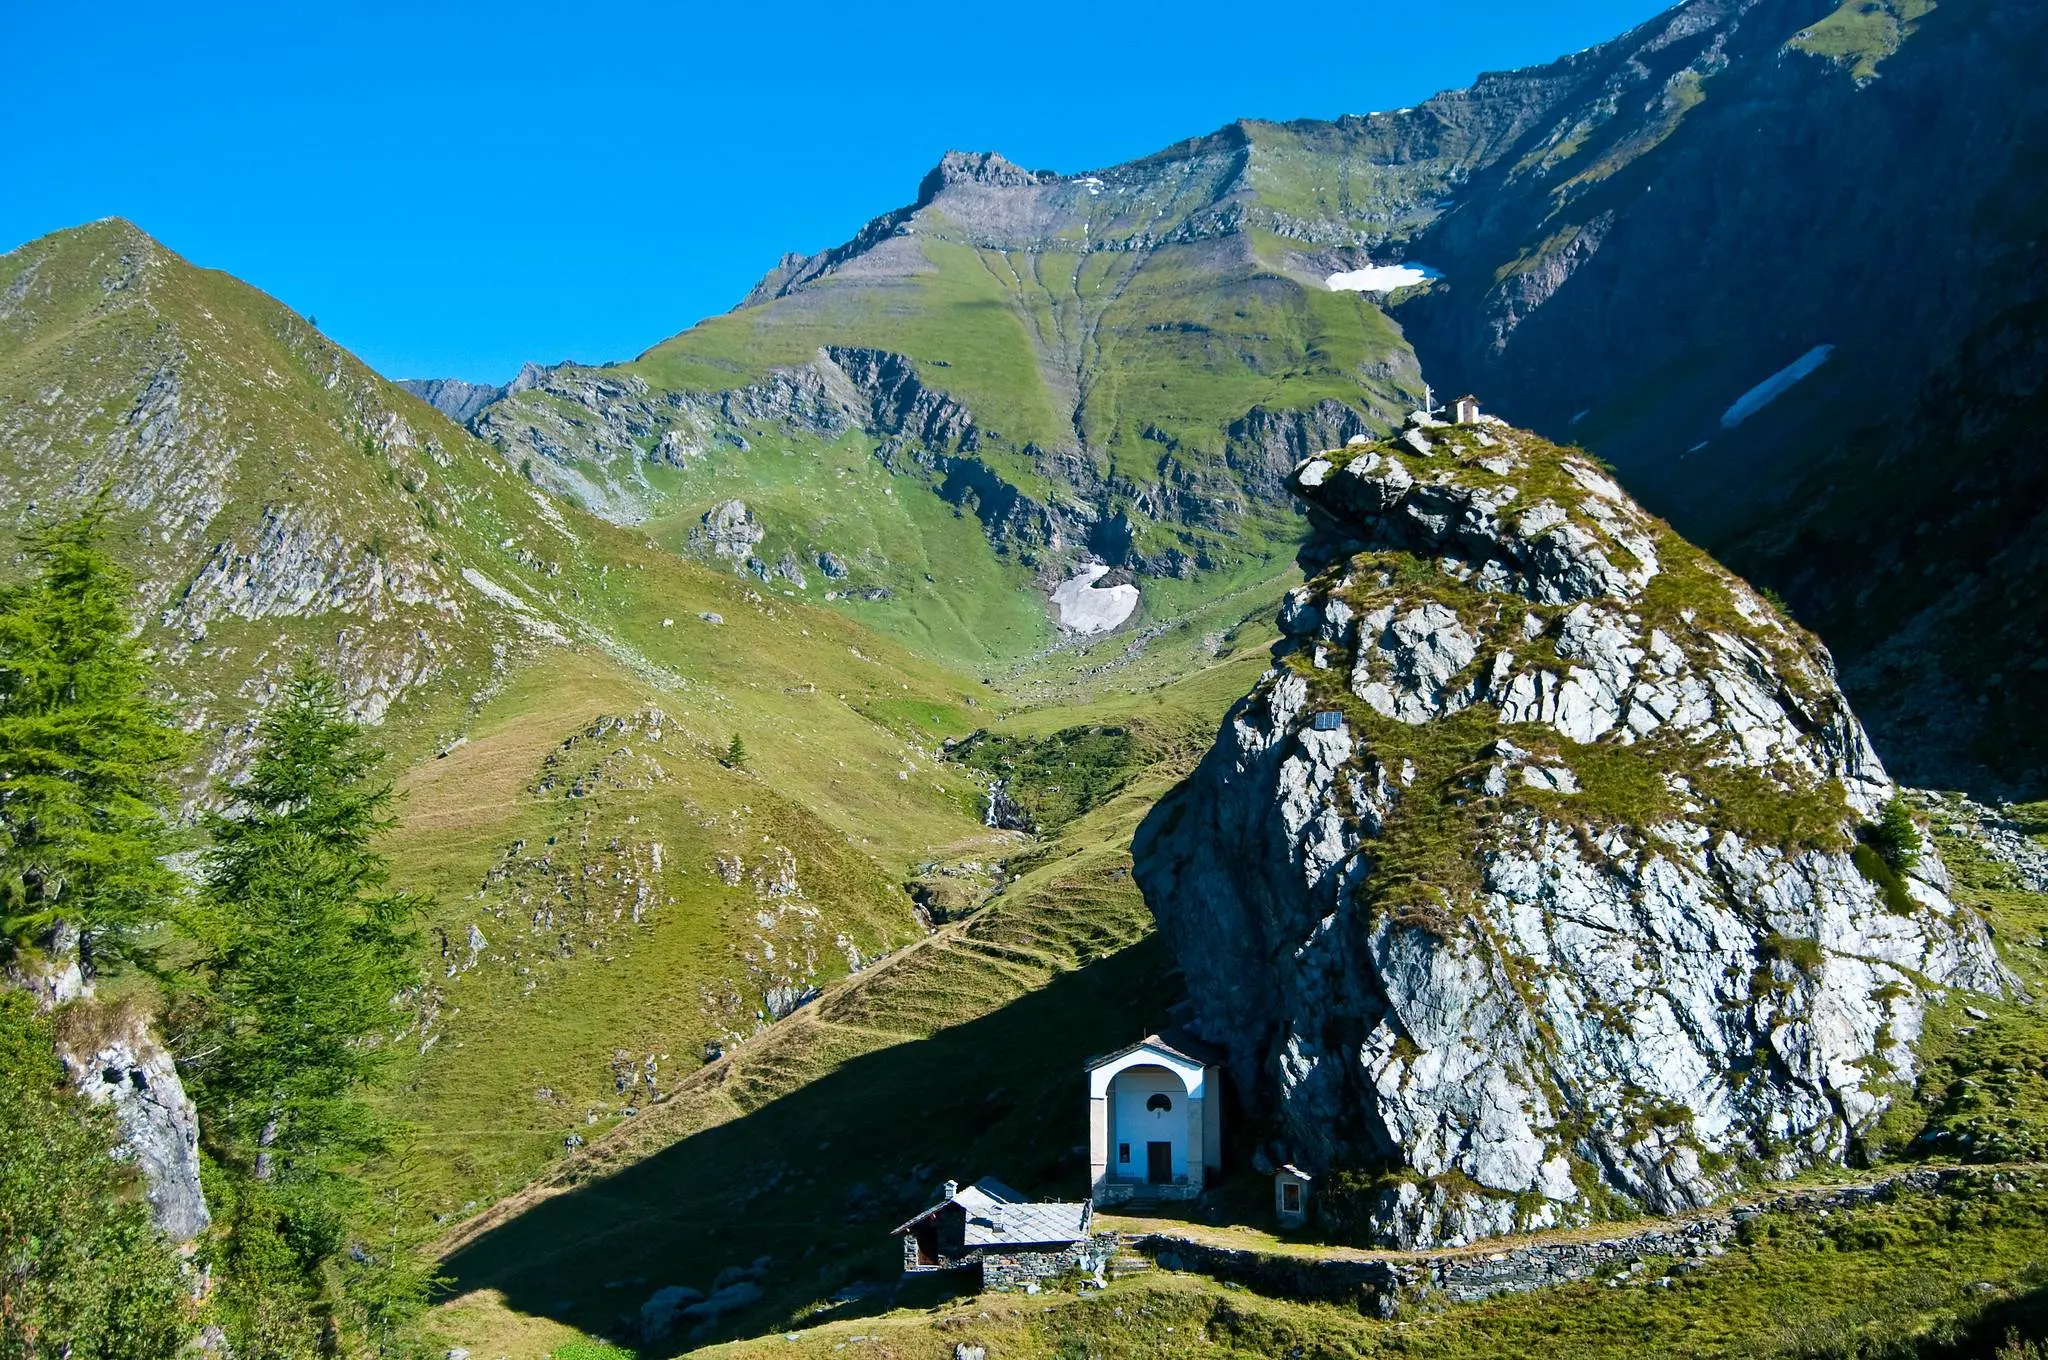 The sanctuary of San Besso, located in a very ancient place of worship in the Gran Paradiso National Park, Italy